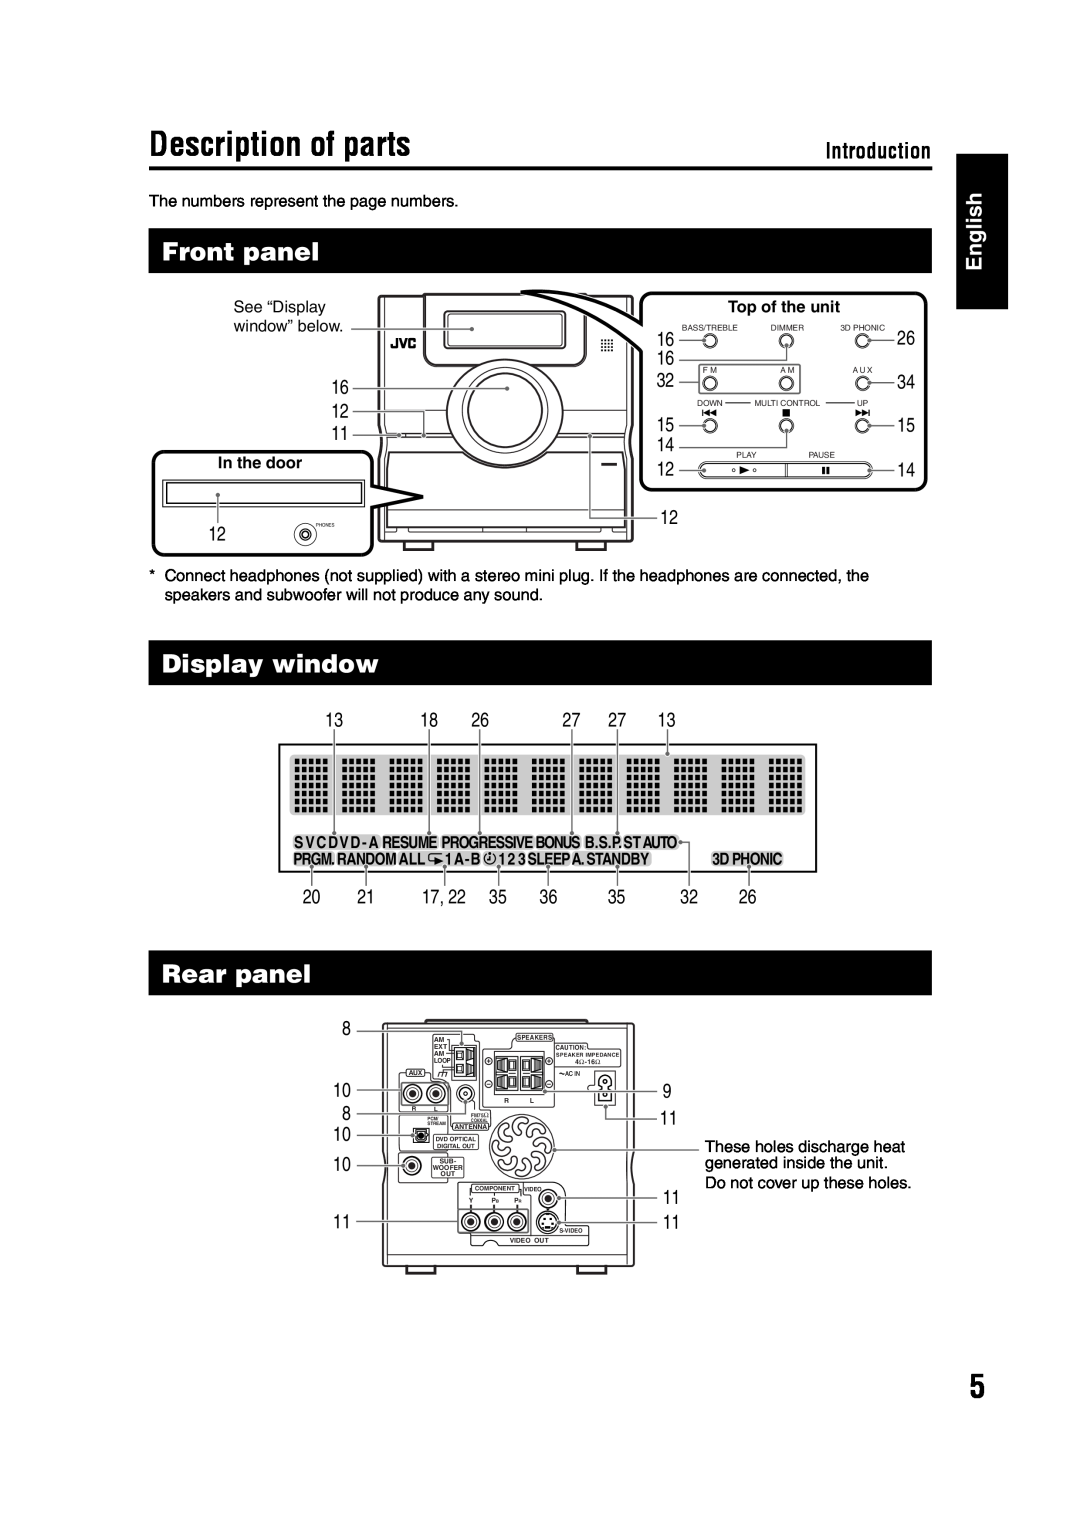 JVC GVT0142-001A manual Description of parts, Front panel, Display window, Rear panel, English 